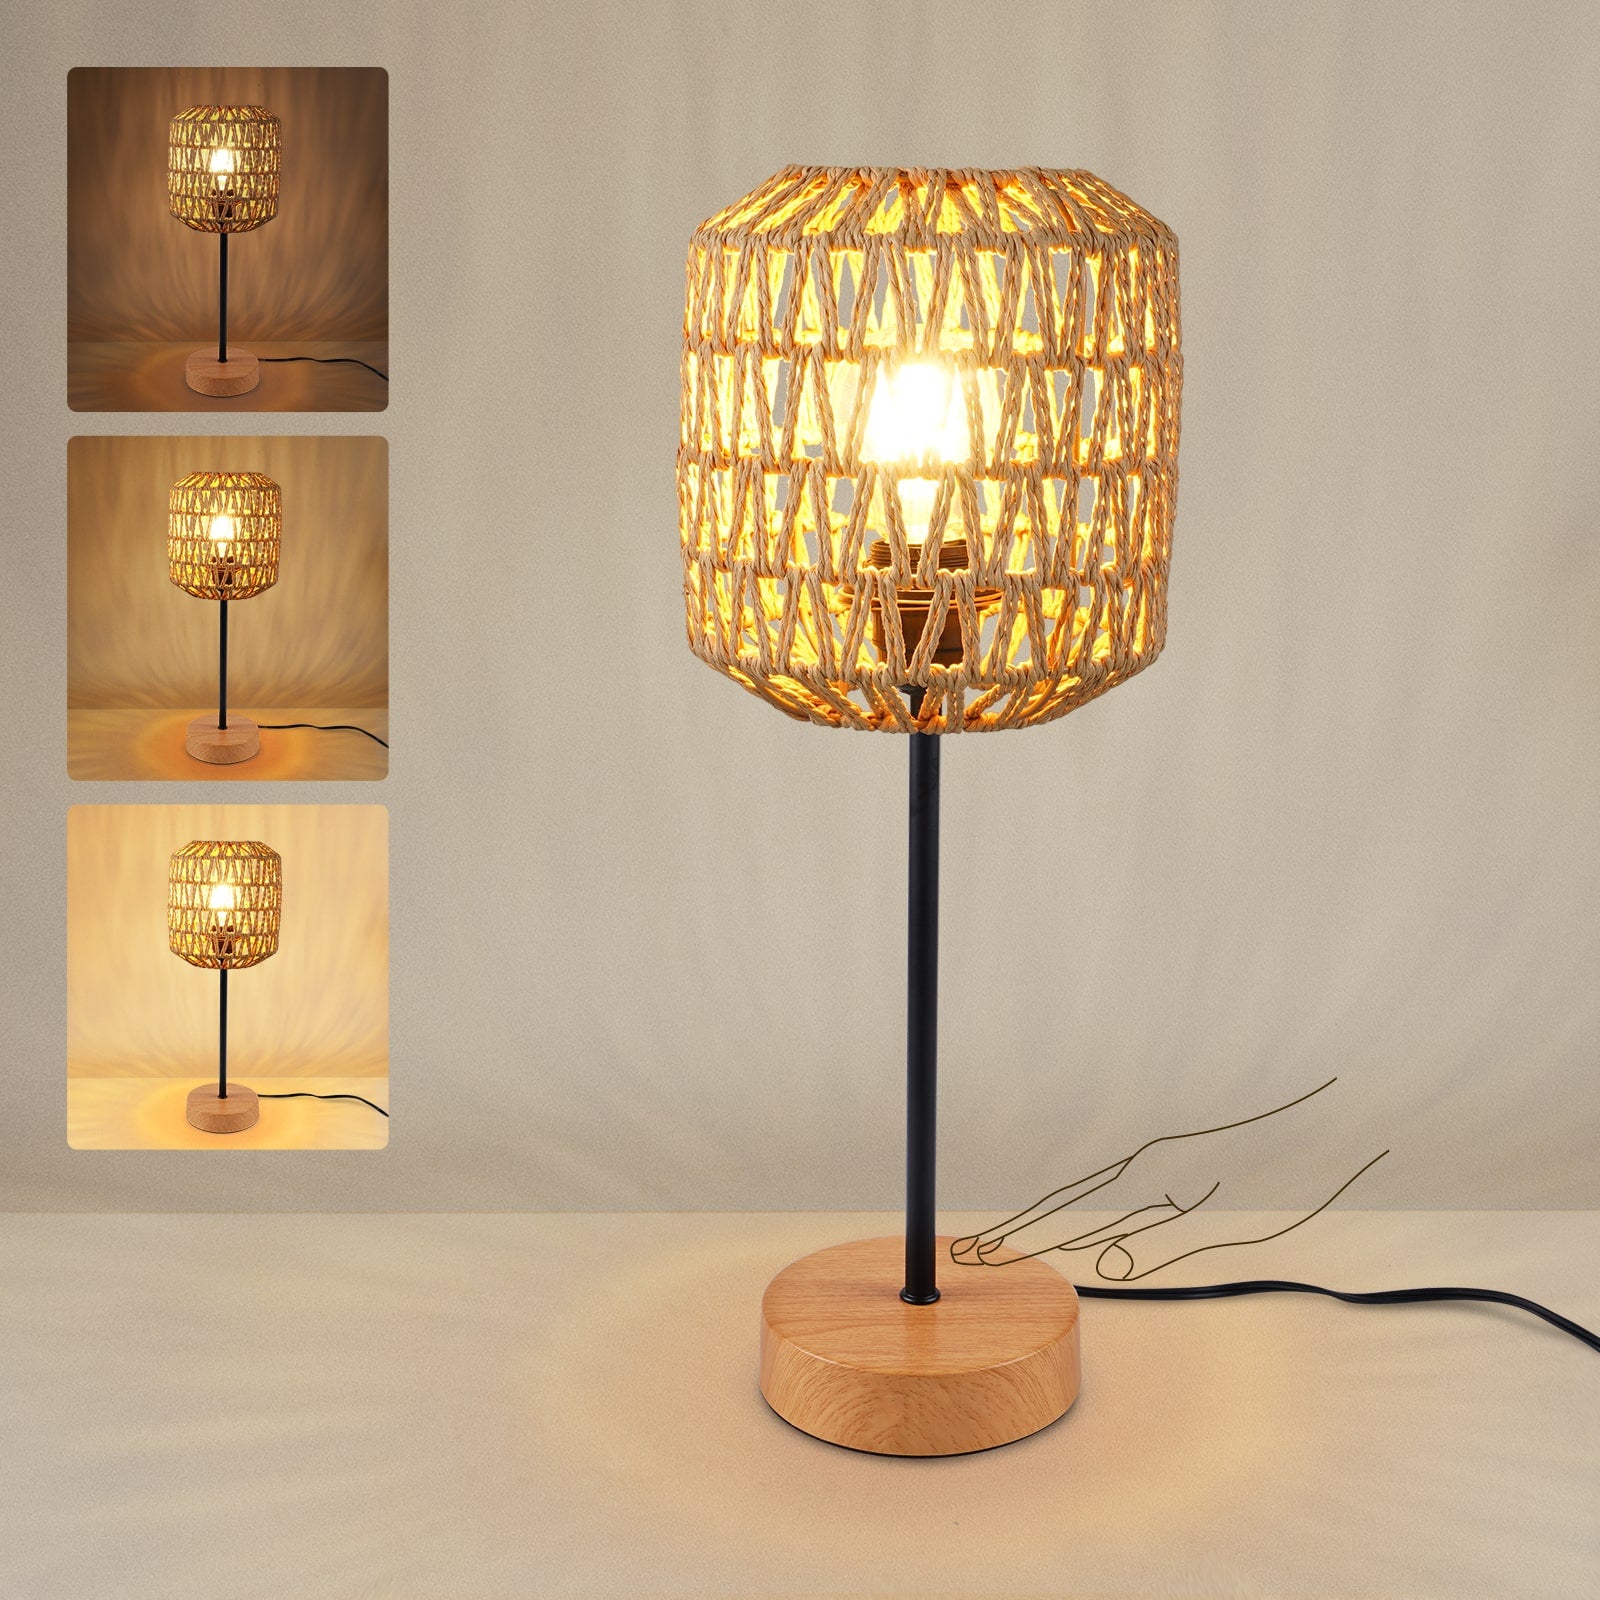 N02 Rustic Rattan Table Light with Handmade Woven Shade for Living Room